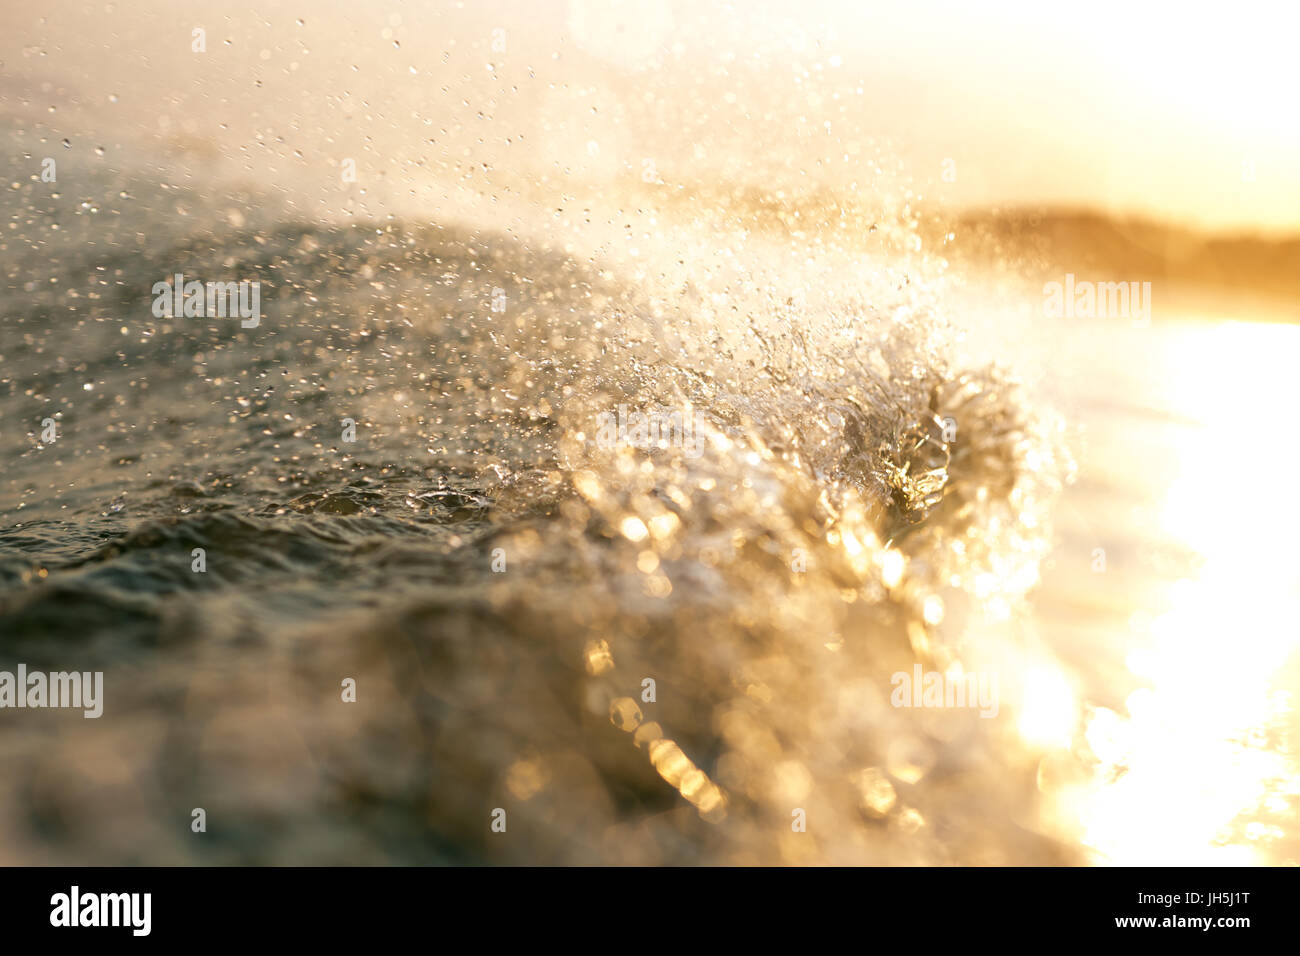 Spray from a breaking wave is illuminated in ethereal, golden light during sunset in this close up image. Stock Photo